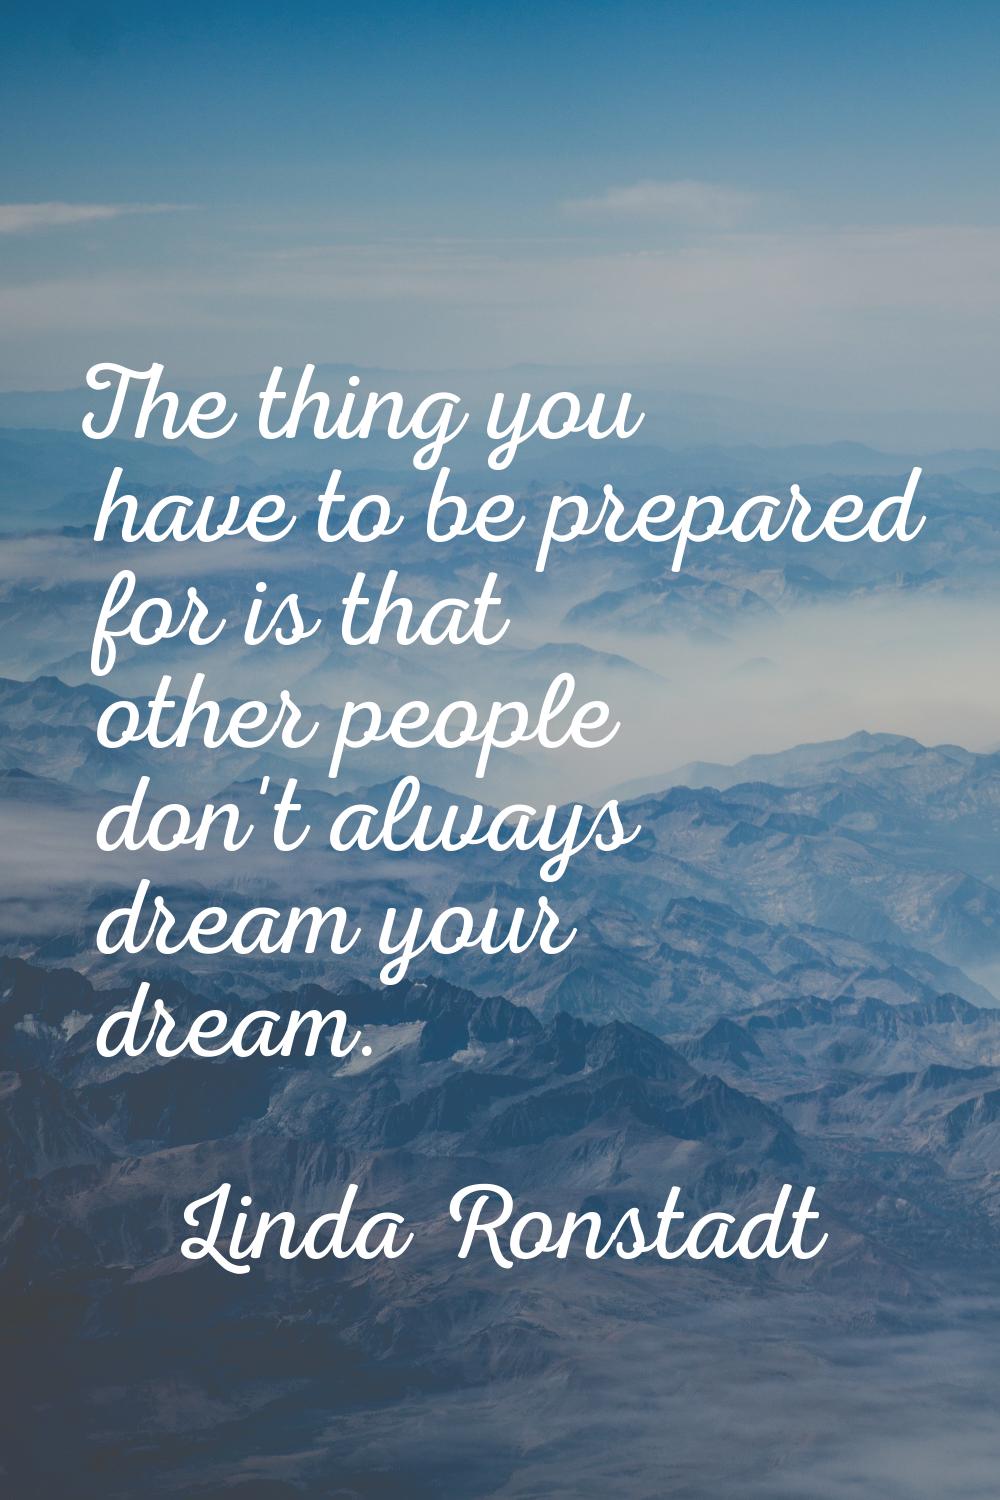 The thing you have to be prepared for is that other people don't always dream your dream.